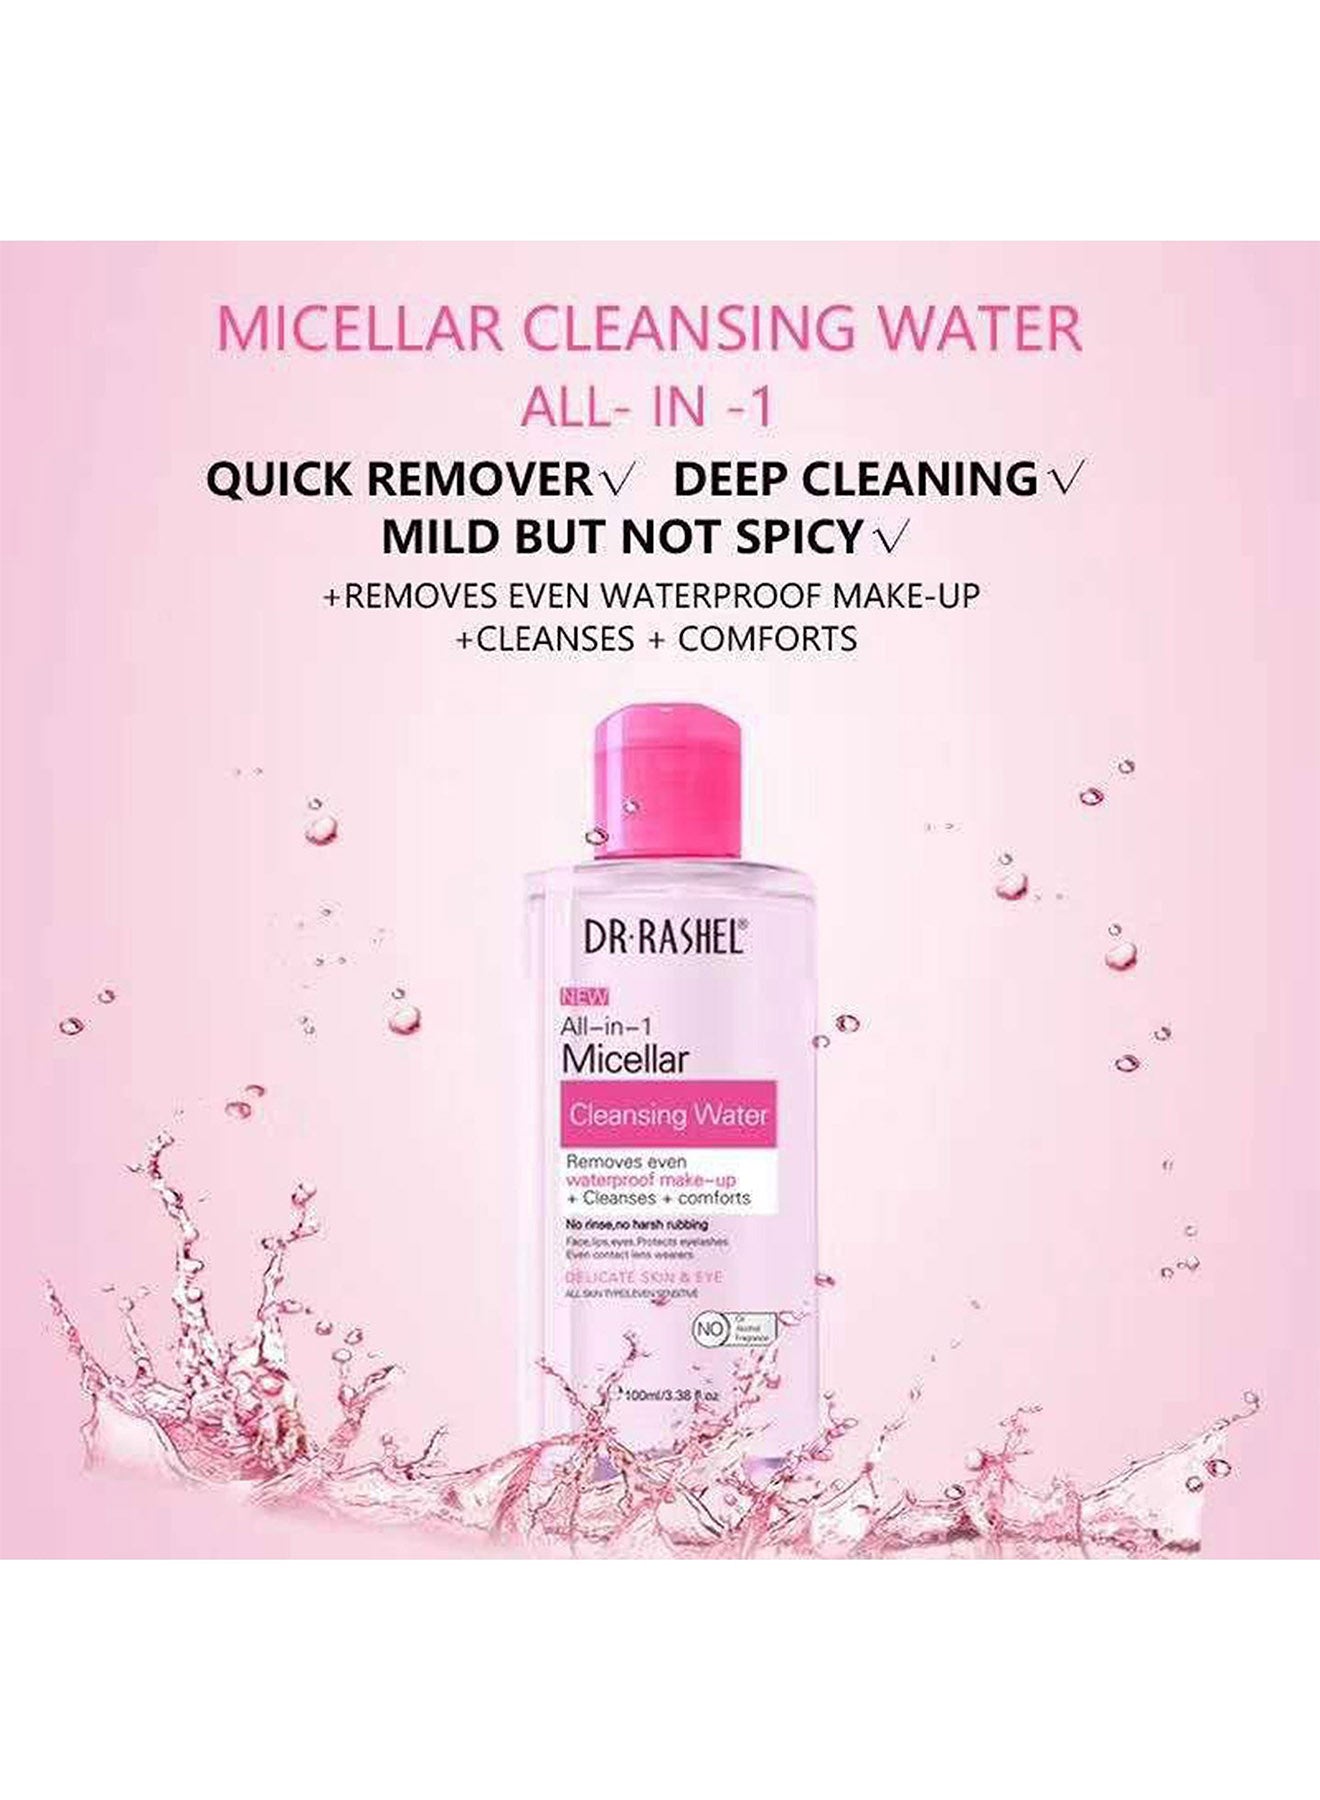 Dr Rashel New AllIn1 Micellar Cleansing Water 100 Ml Makeup remover